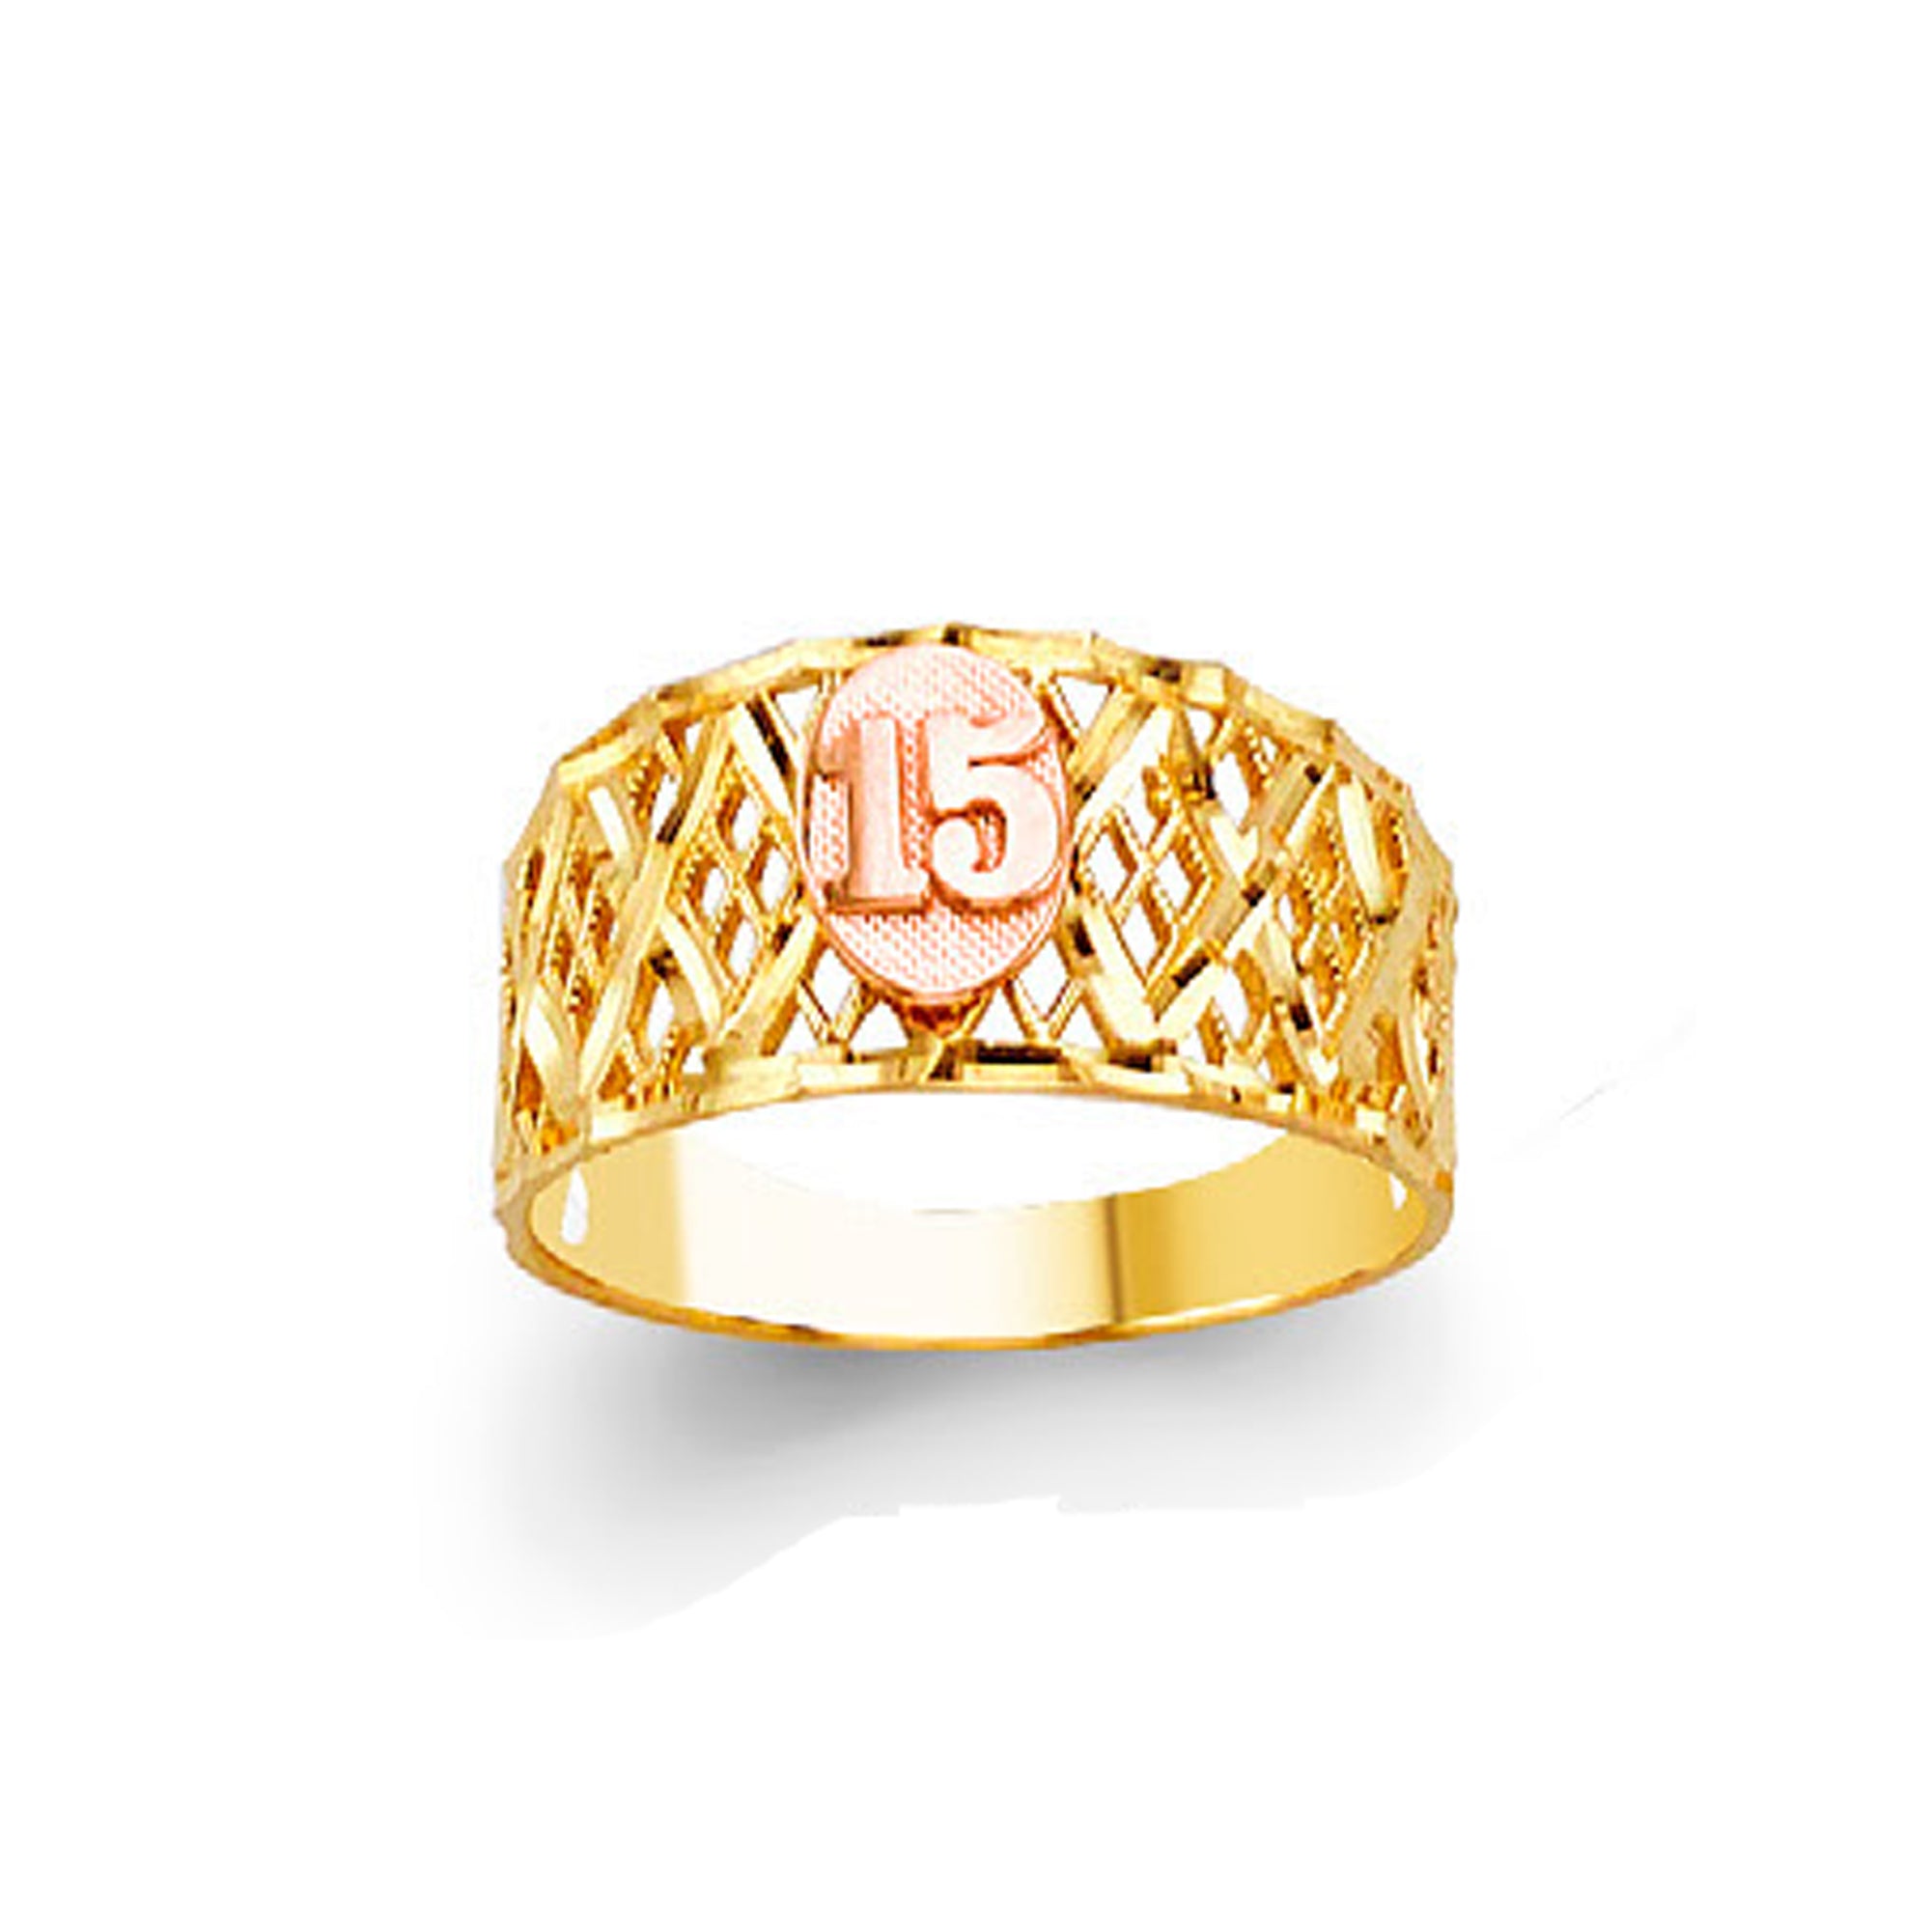 Lustrous Lattice 15 Anos Ring in Solid Gold 